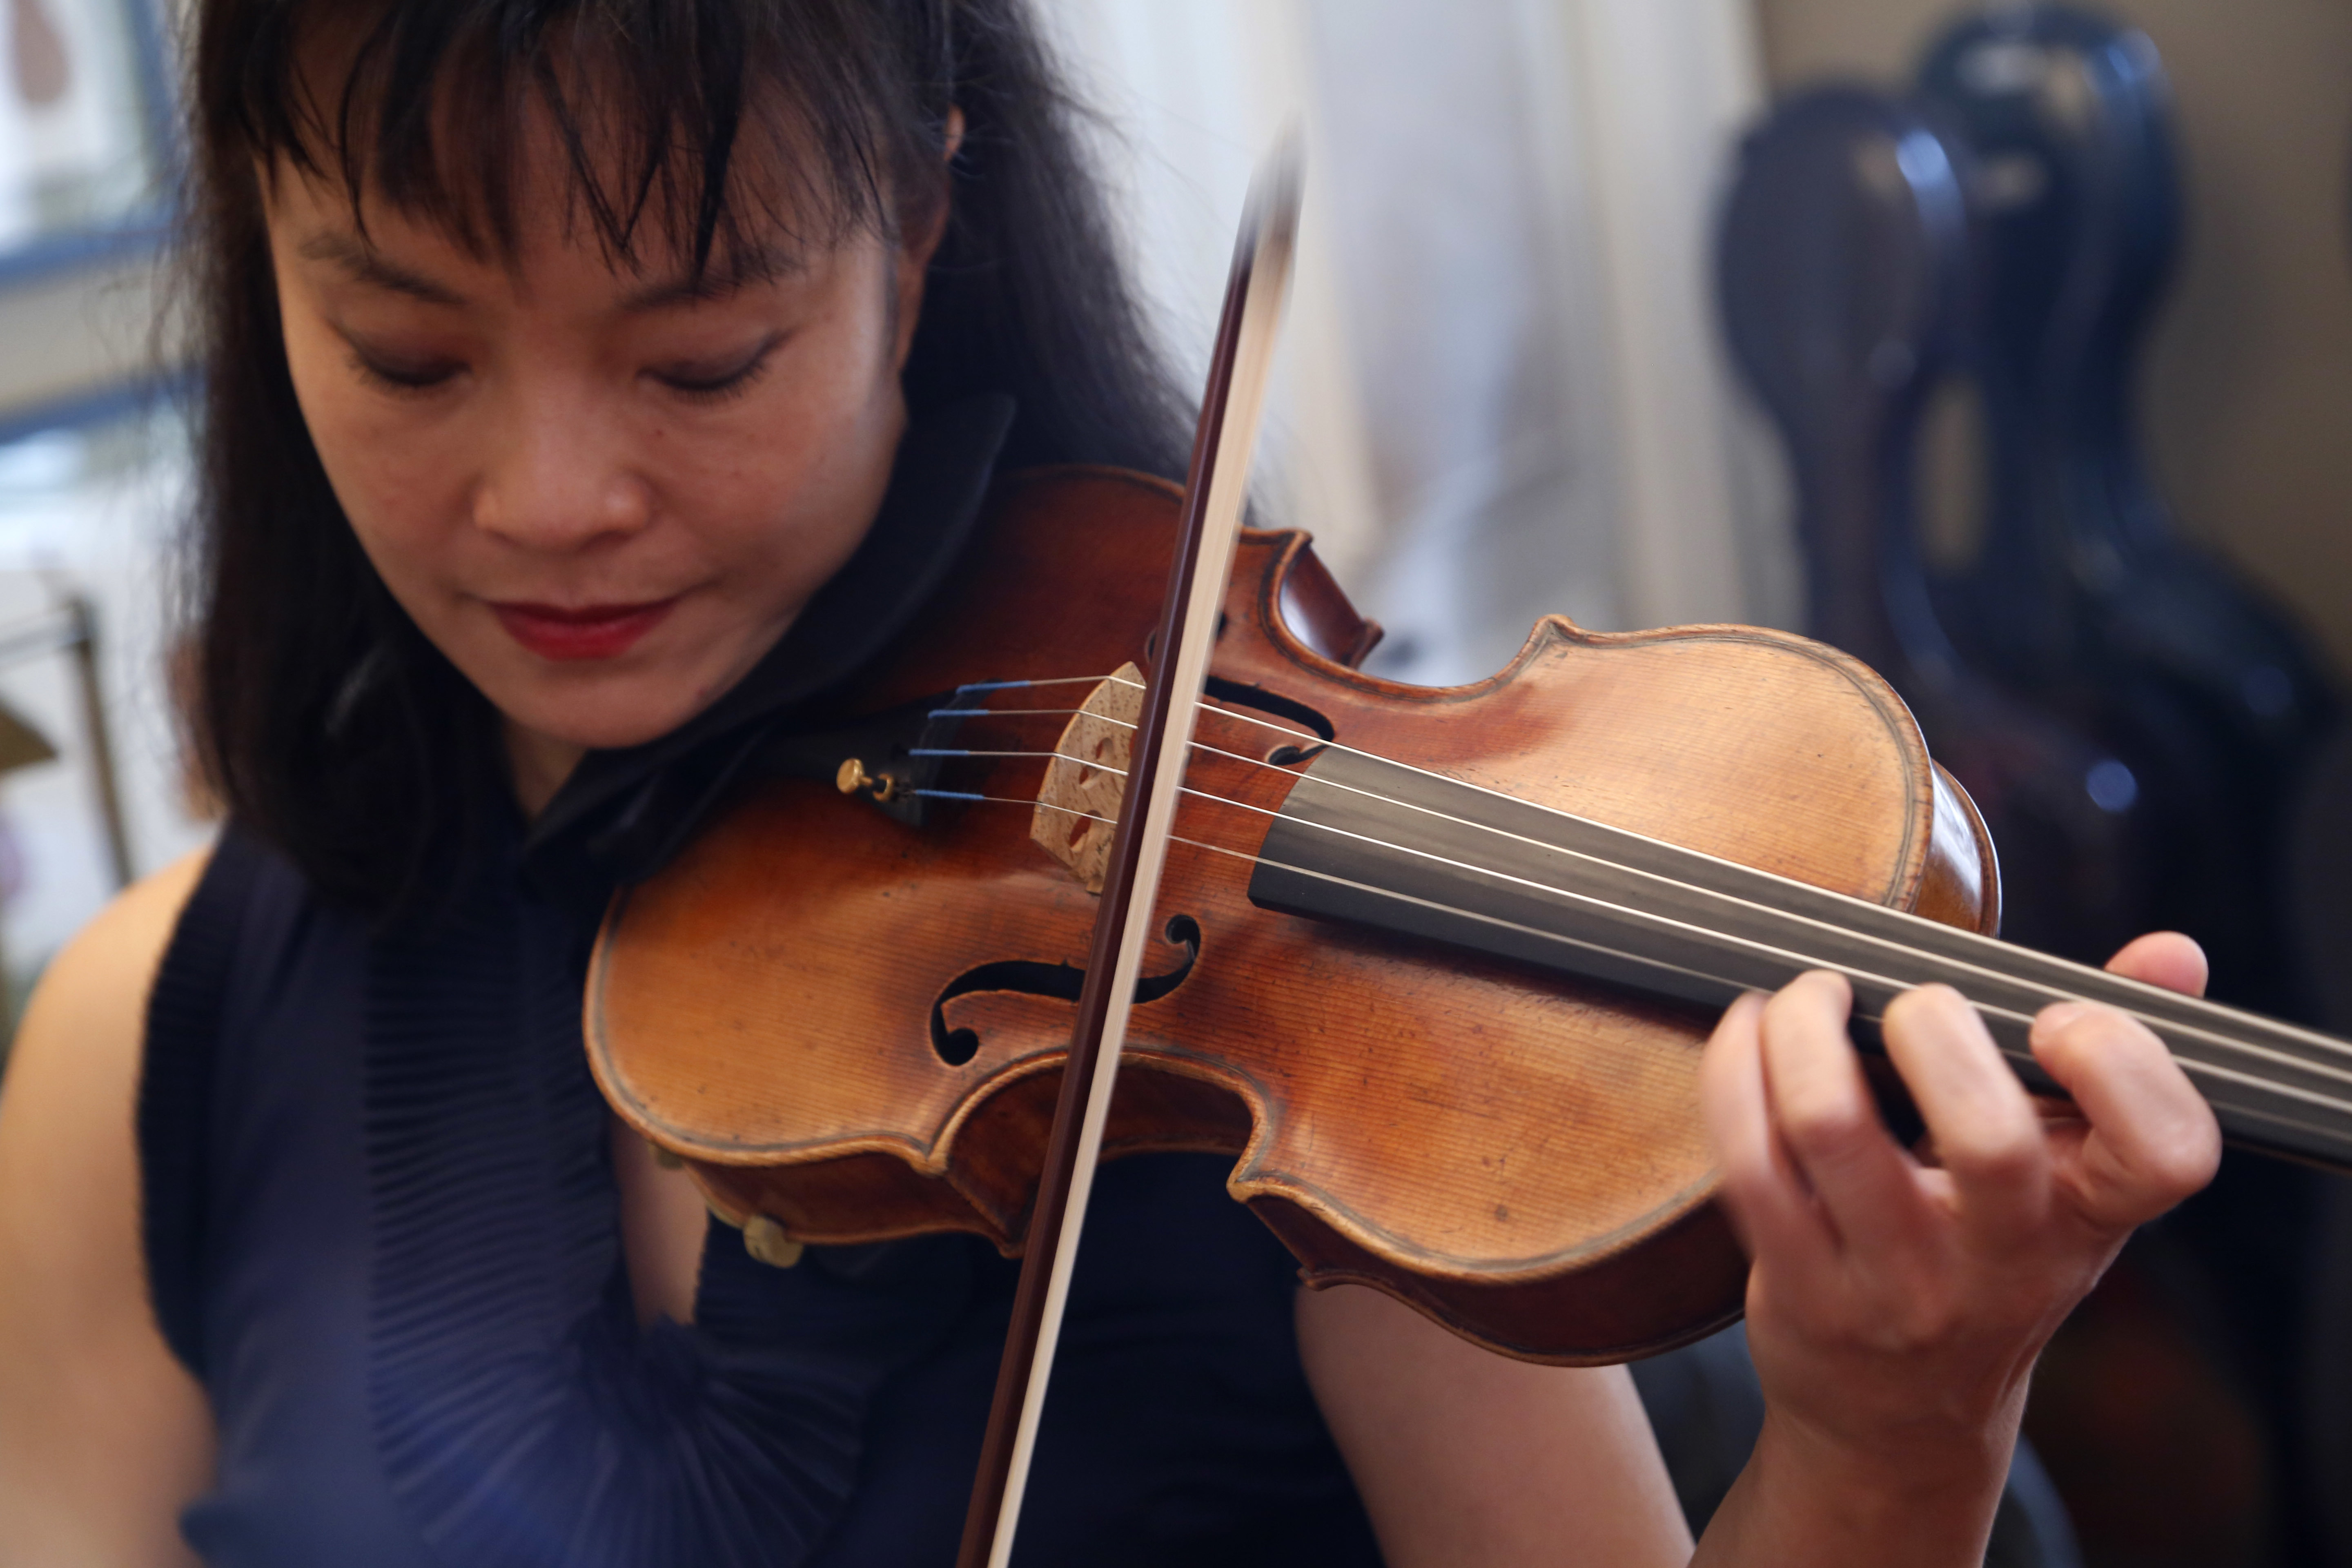 Mira Wang plays the Ames Stradivarius violin in New York, Wednesday, March 8, 2017. After a meticulous restoration that took more than a year, the Ames Stradivarius violin that was stolen from violinist Roman Totenberg is about to return to the stage. Wang, a former student of Totenberg's, will play the instrument at a private concert in New York on March 13. (AP Photo/Seth Wenig)